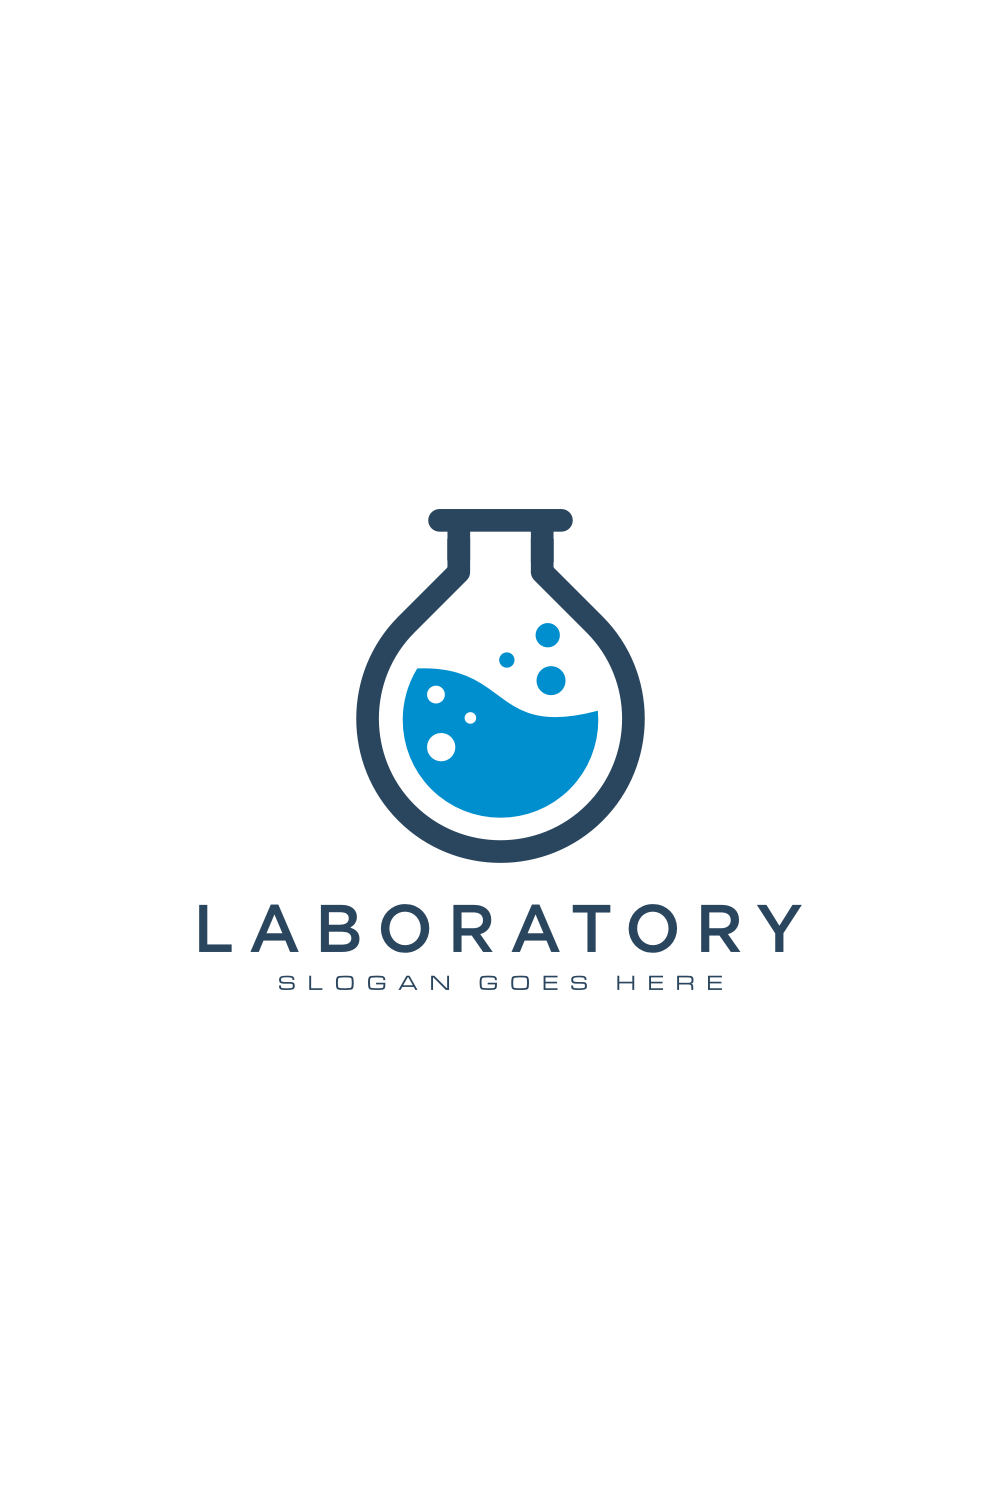 Laboratory Science Logo Pinterest preview.